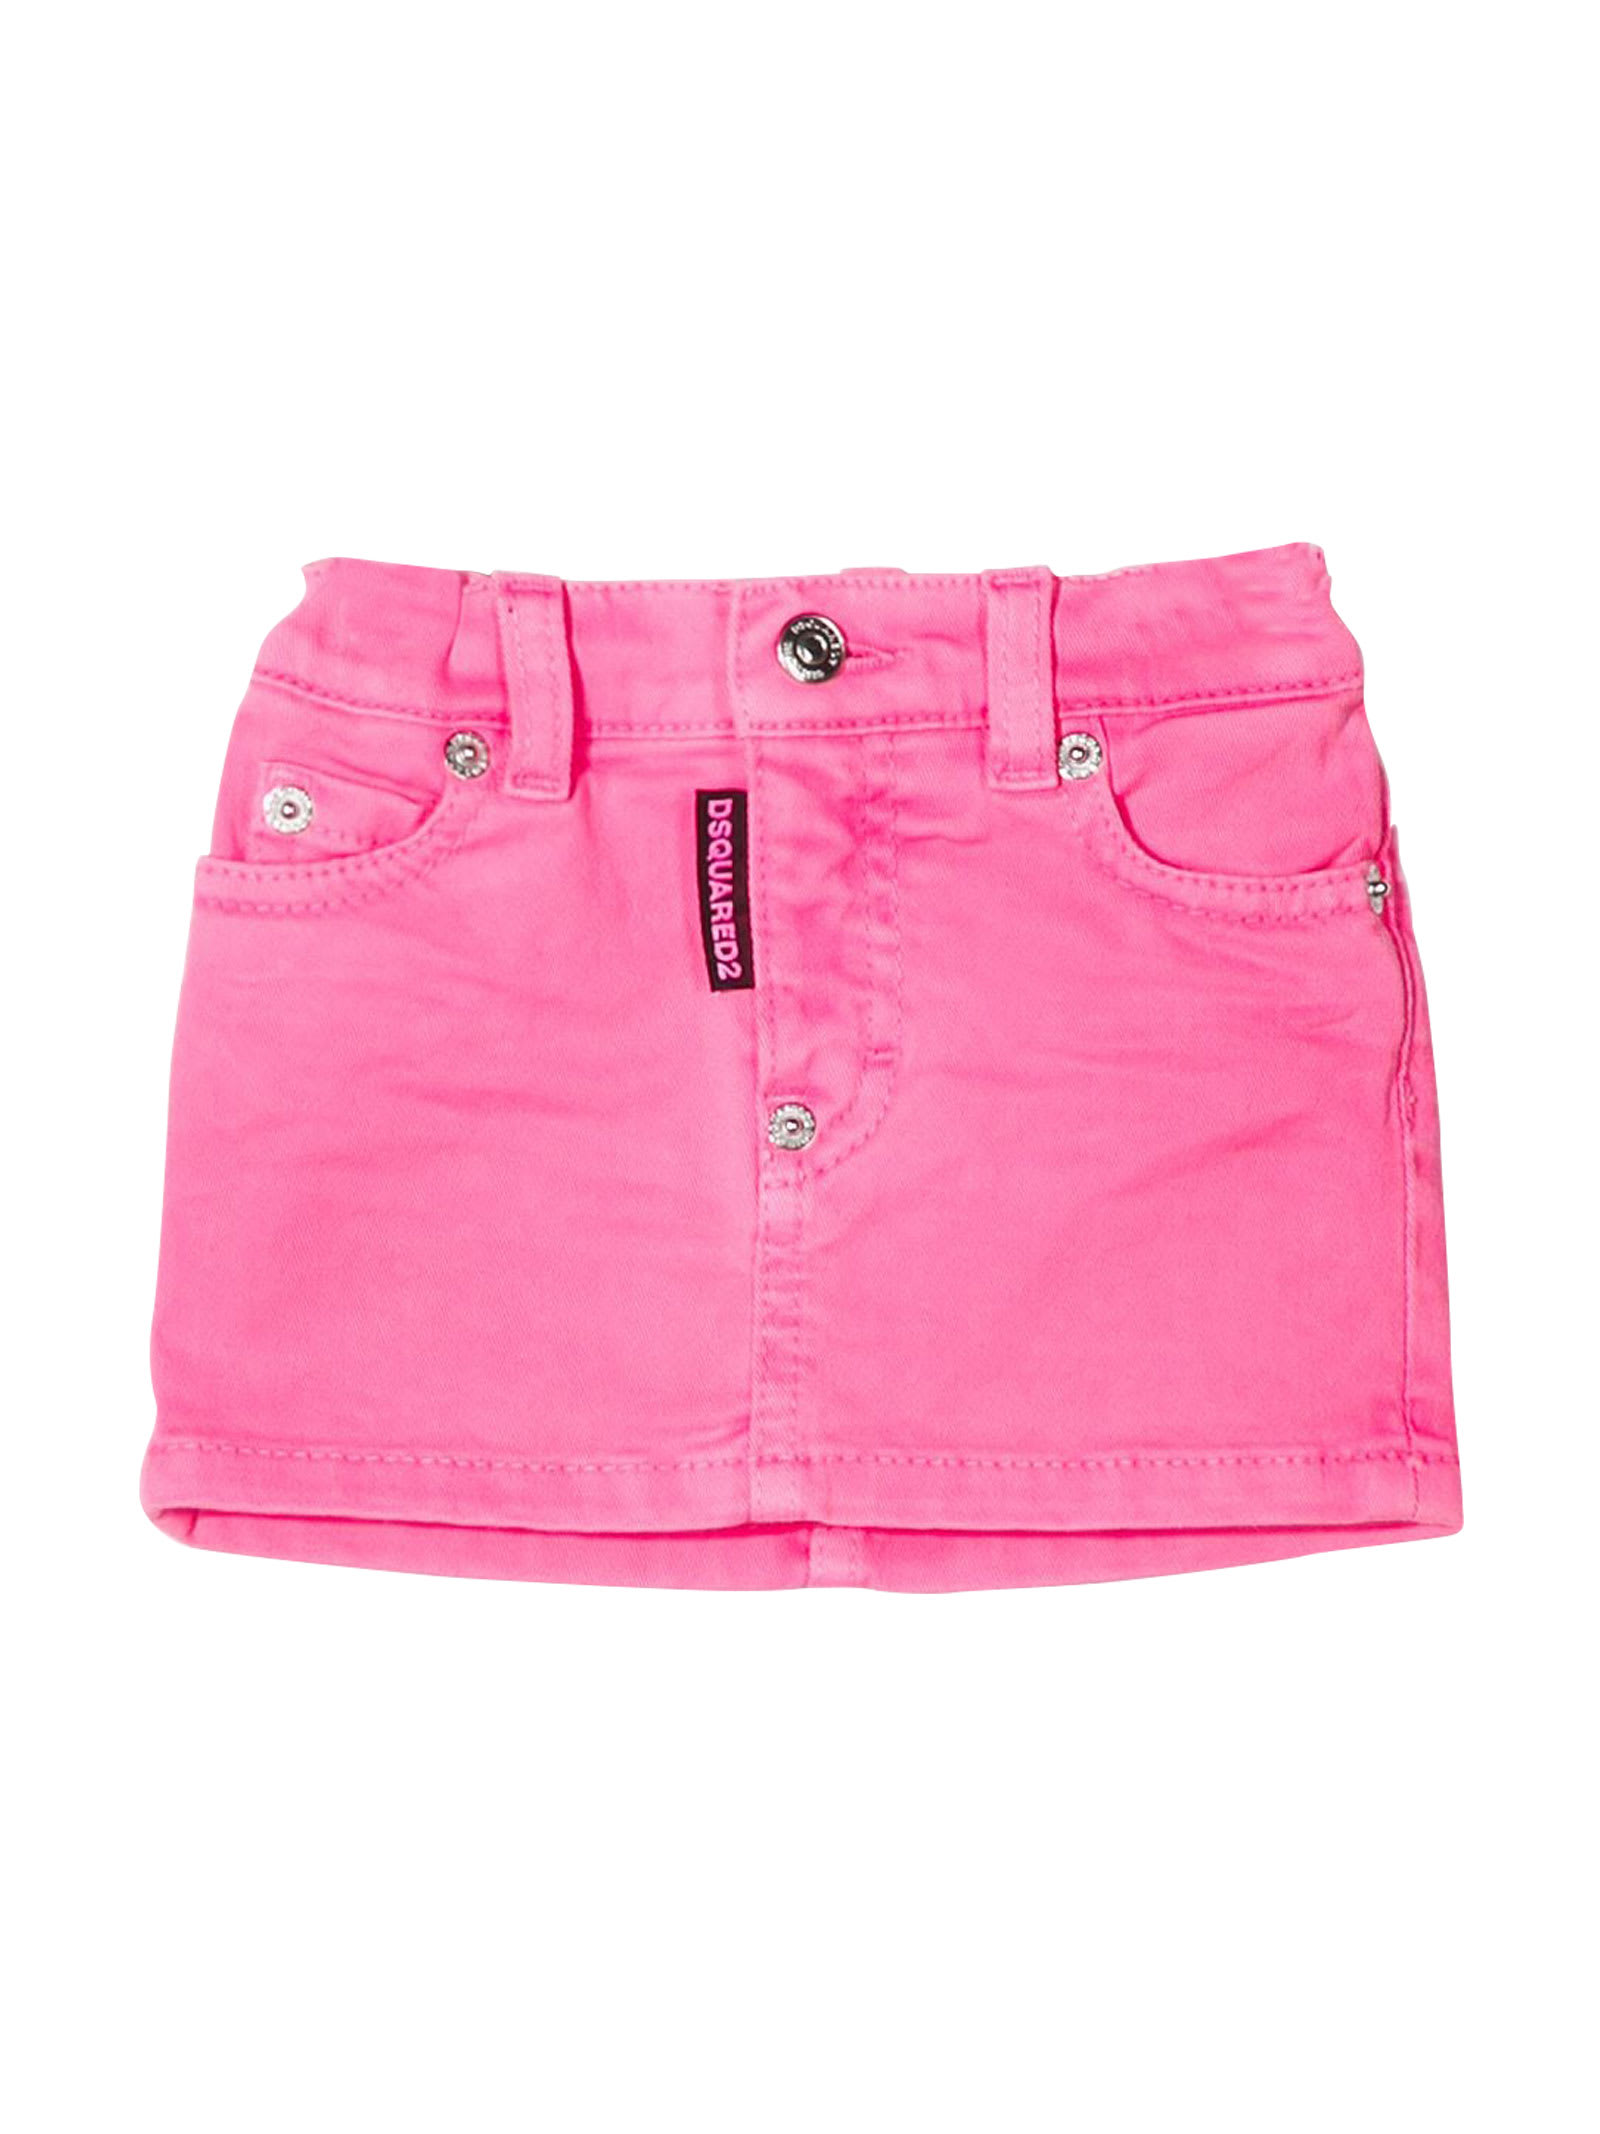 dsquared2 pink